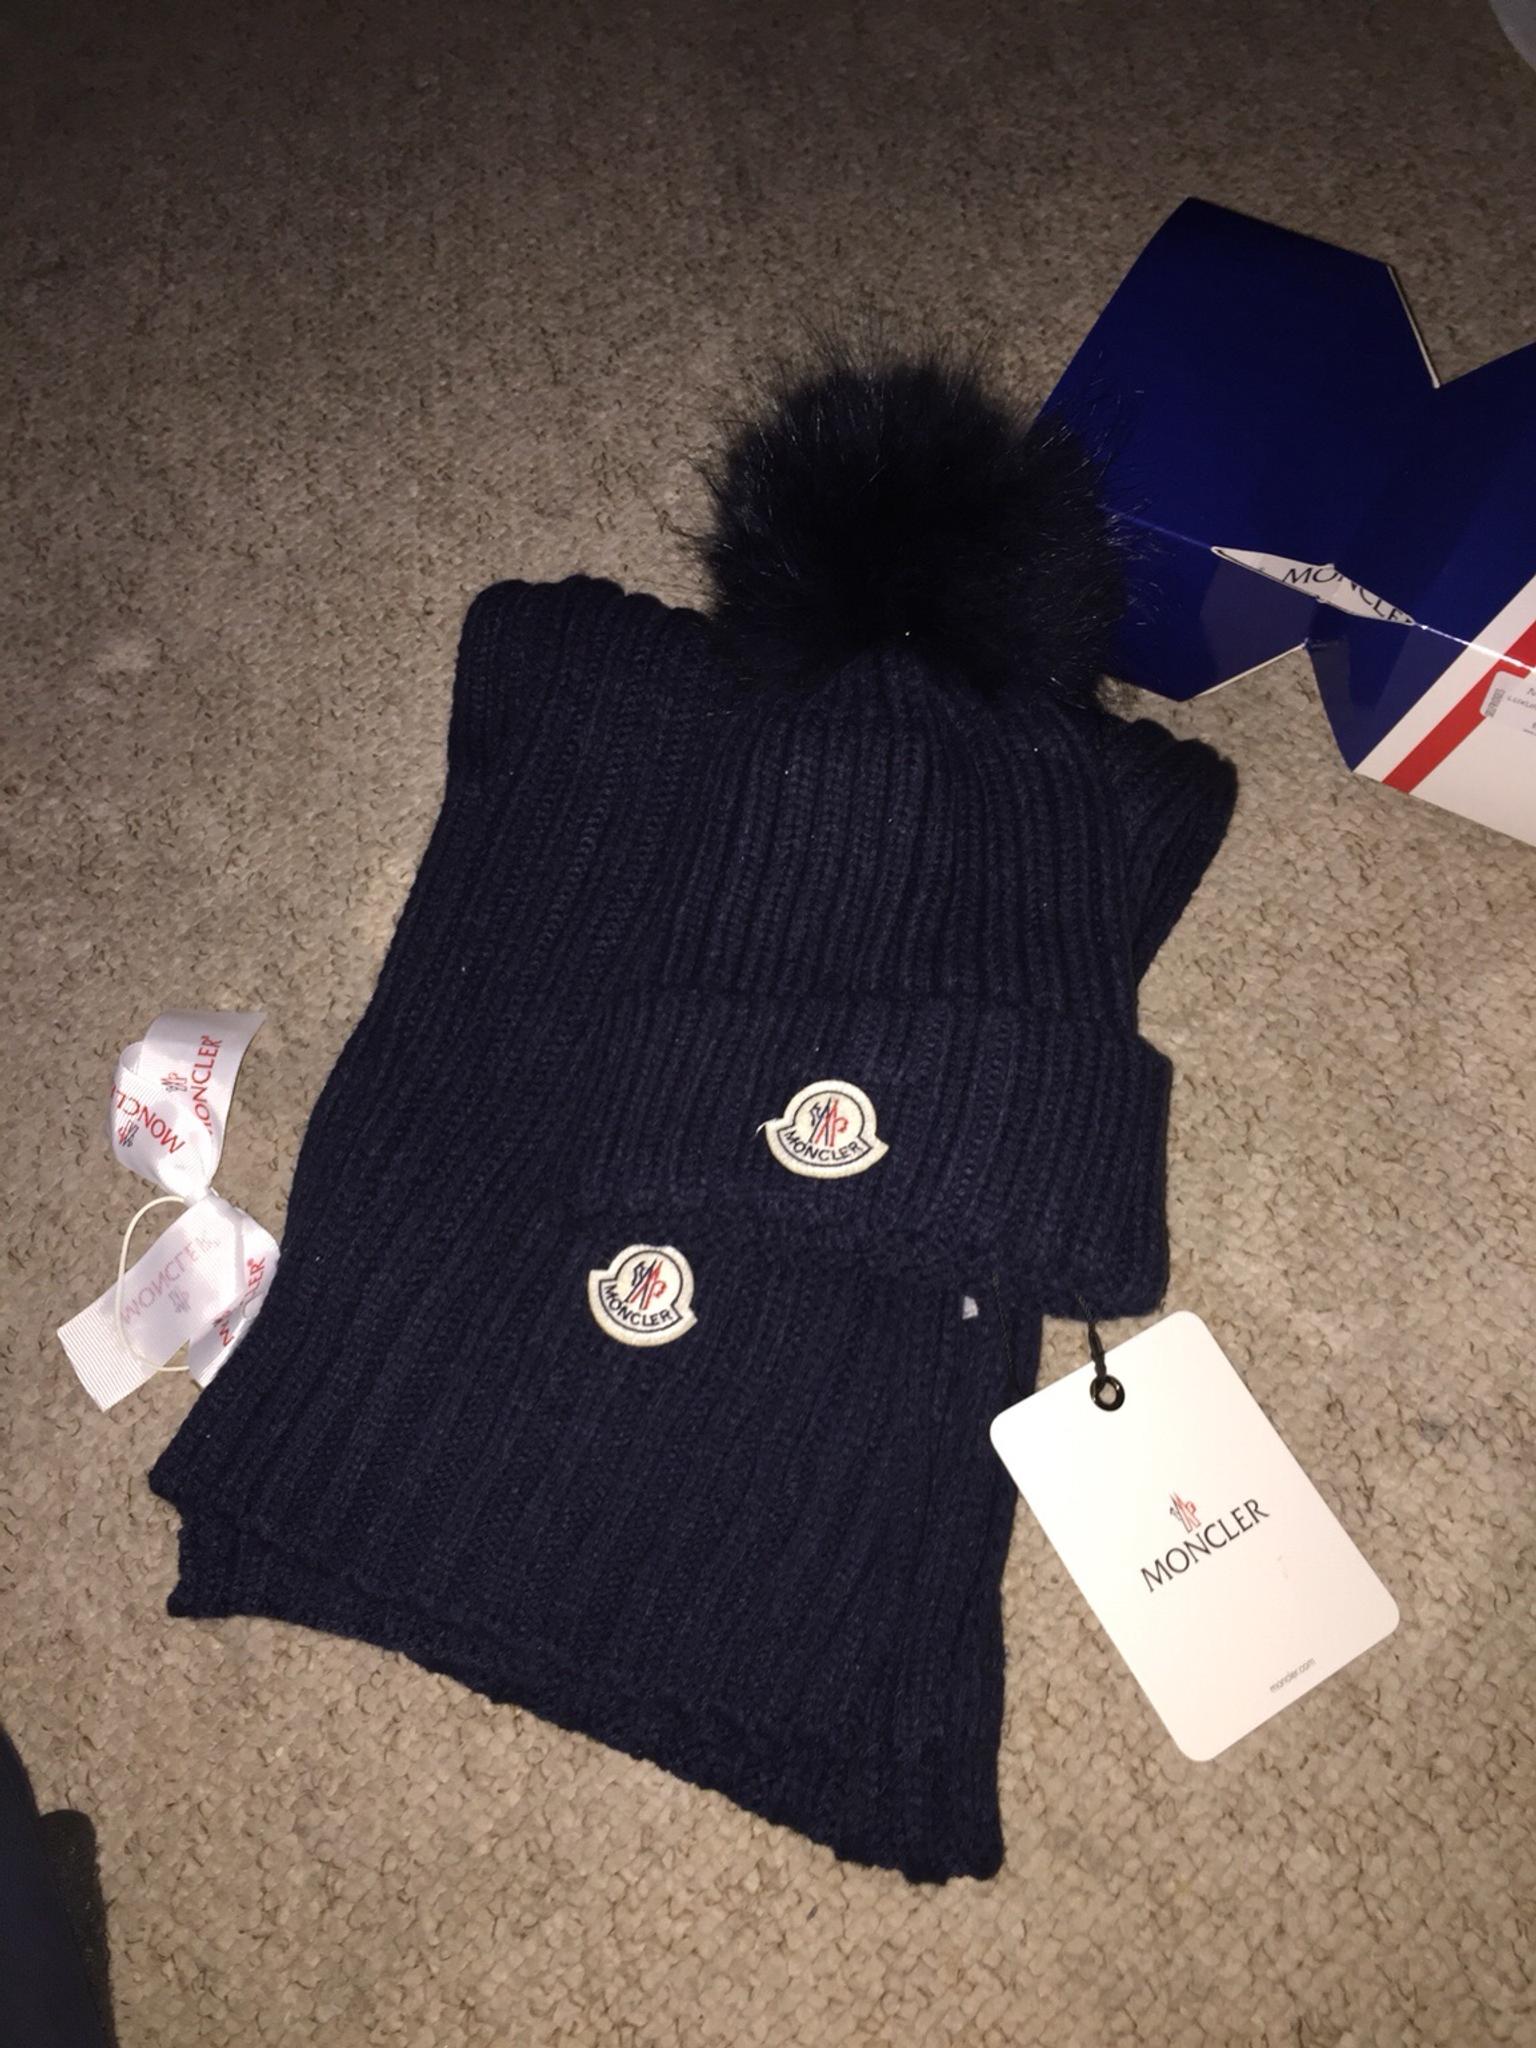 moncler hat and scarf set